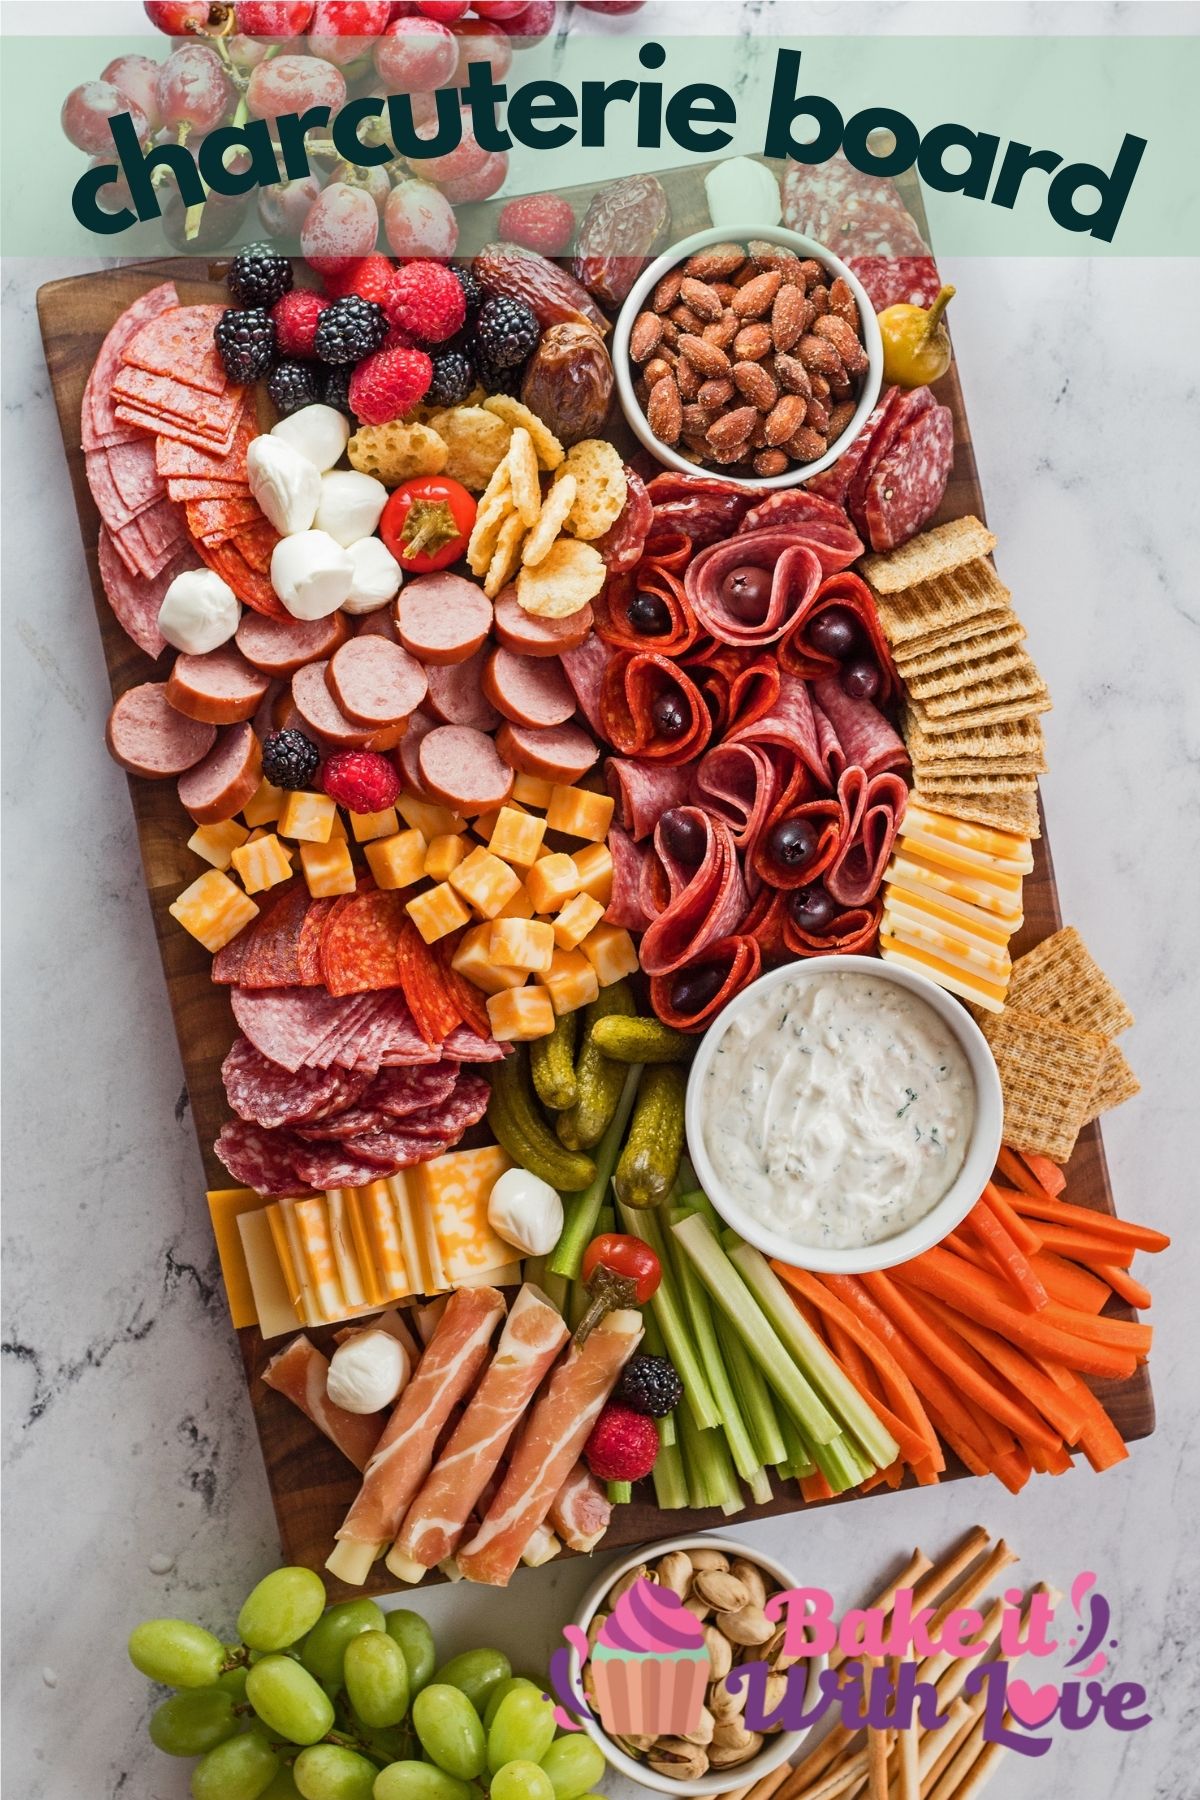 Charcuterie Board (from Simple to Holiday Centerpiece!) - Recipes